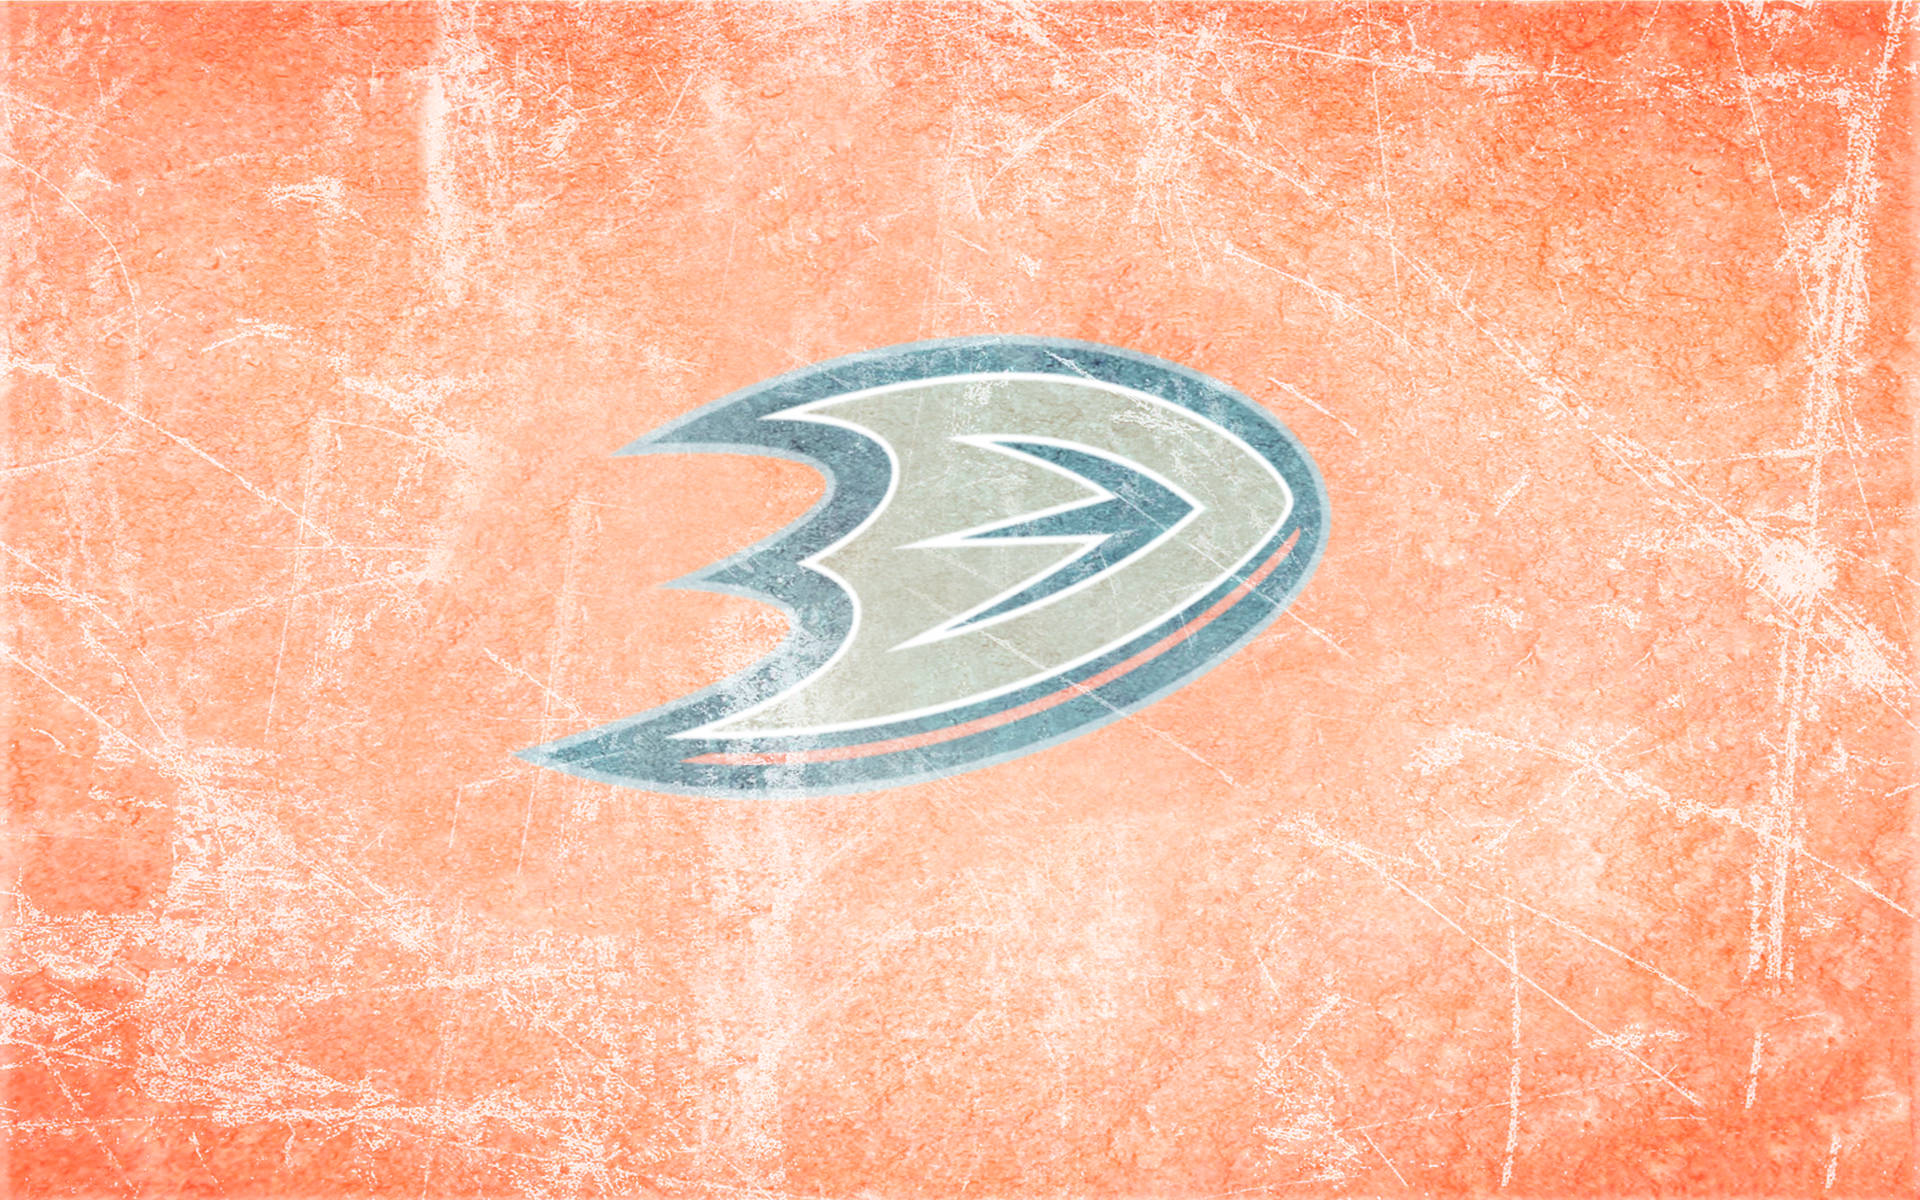 Anaheim Ducks On Ice - A Grungy Vintage Appeal Background